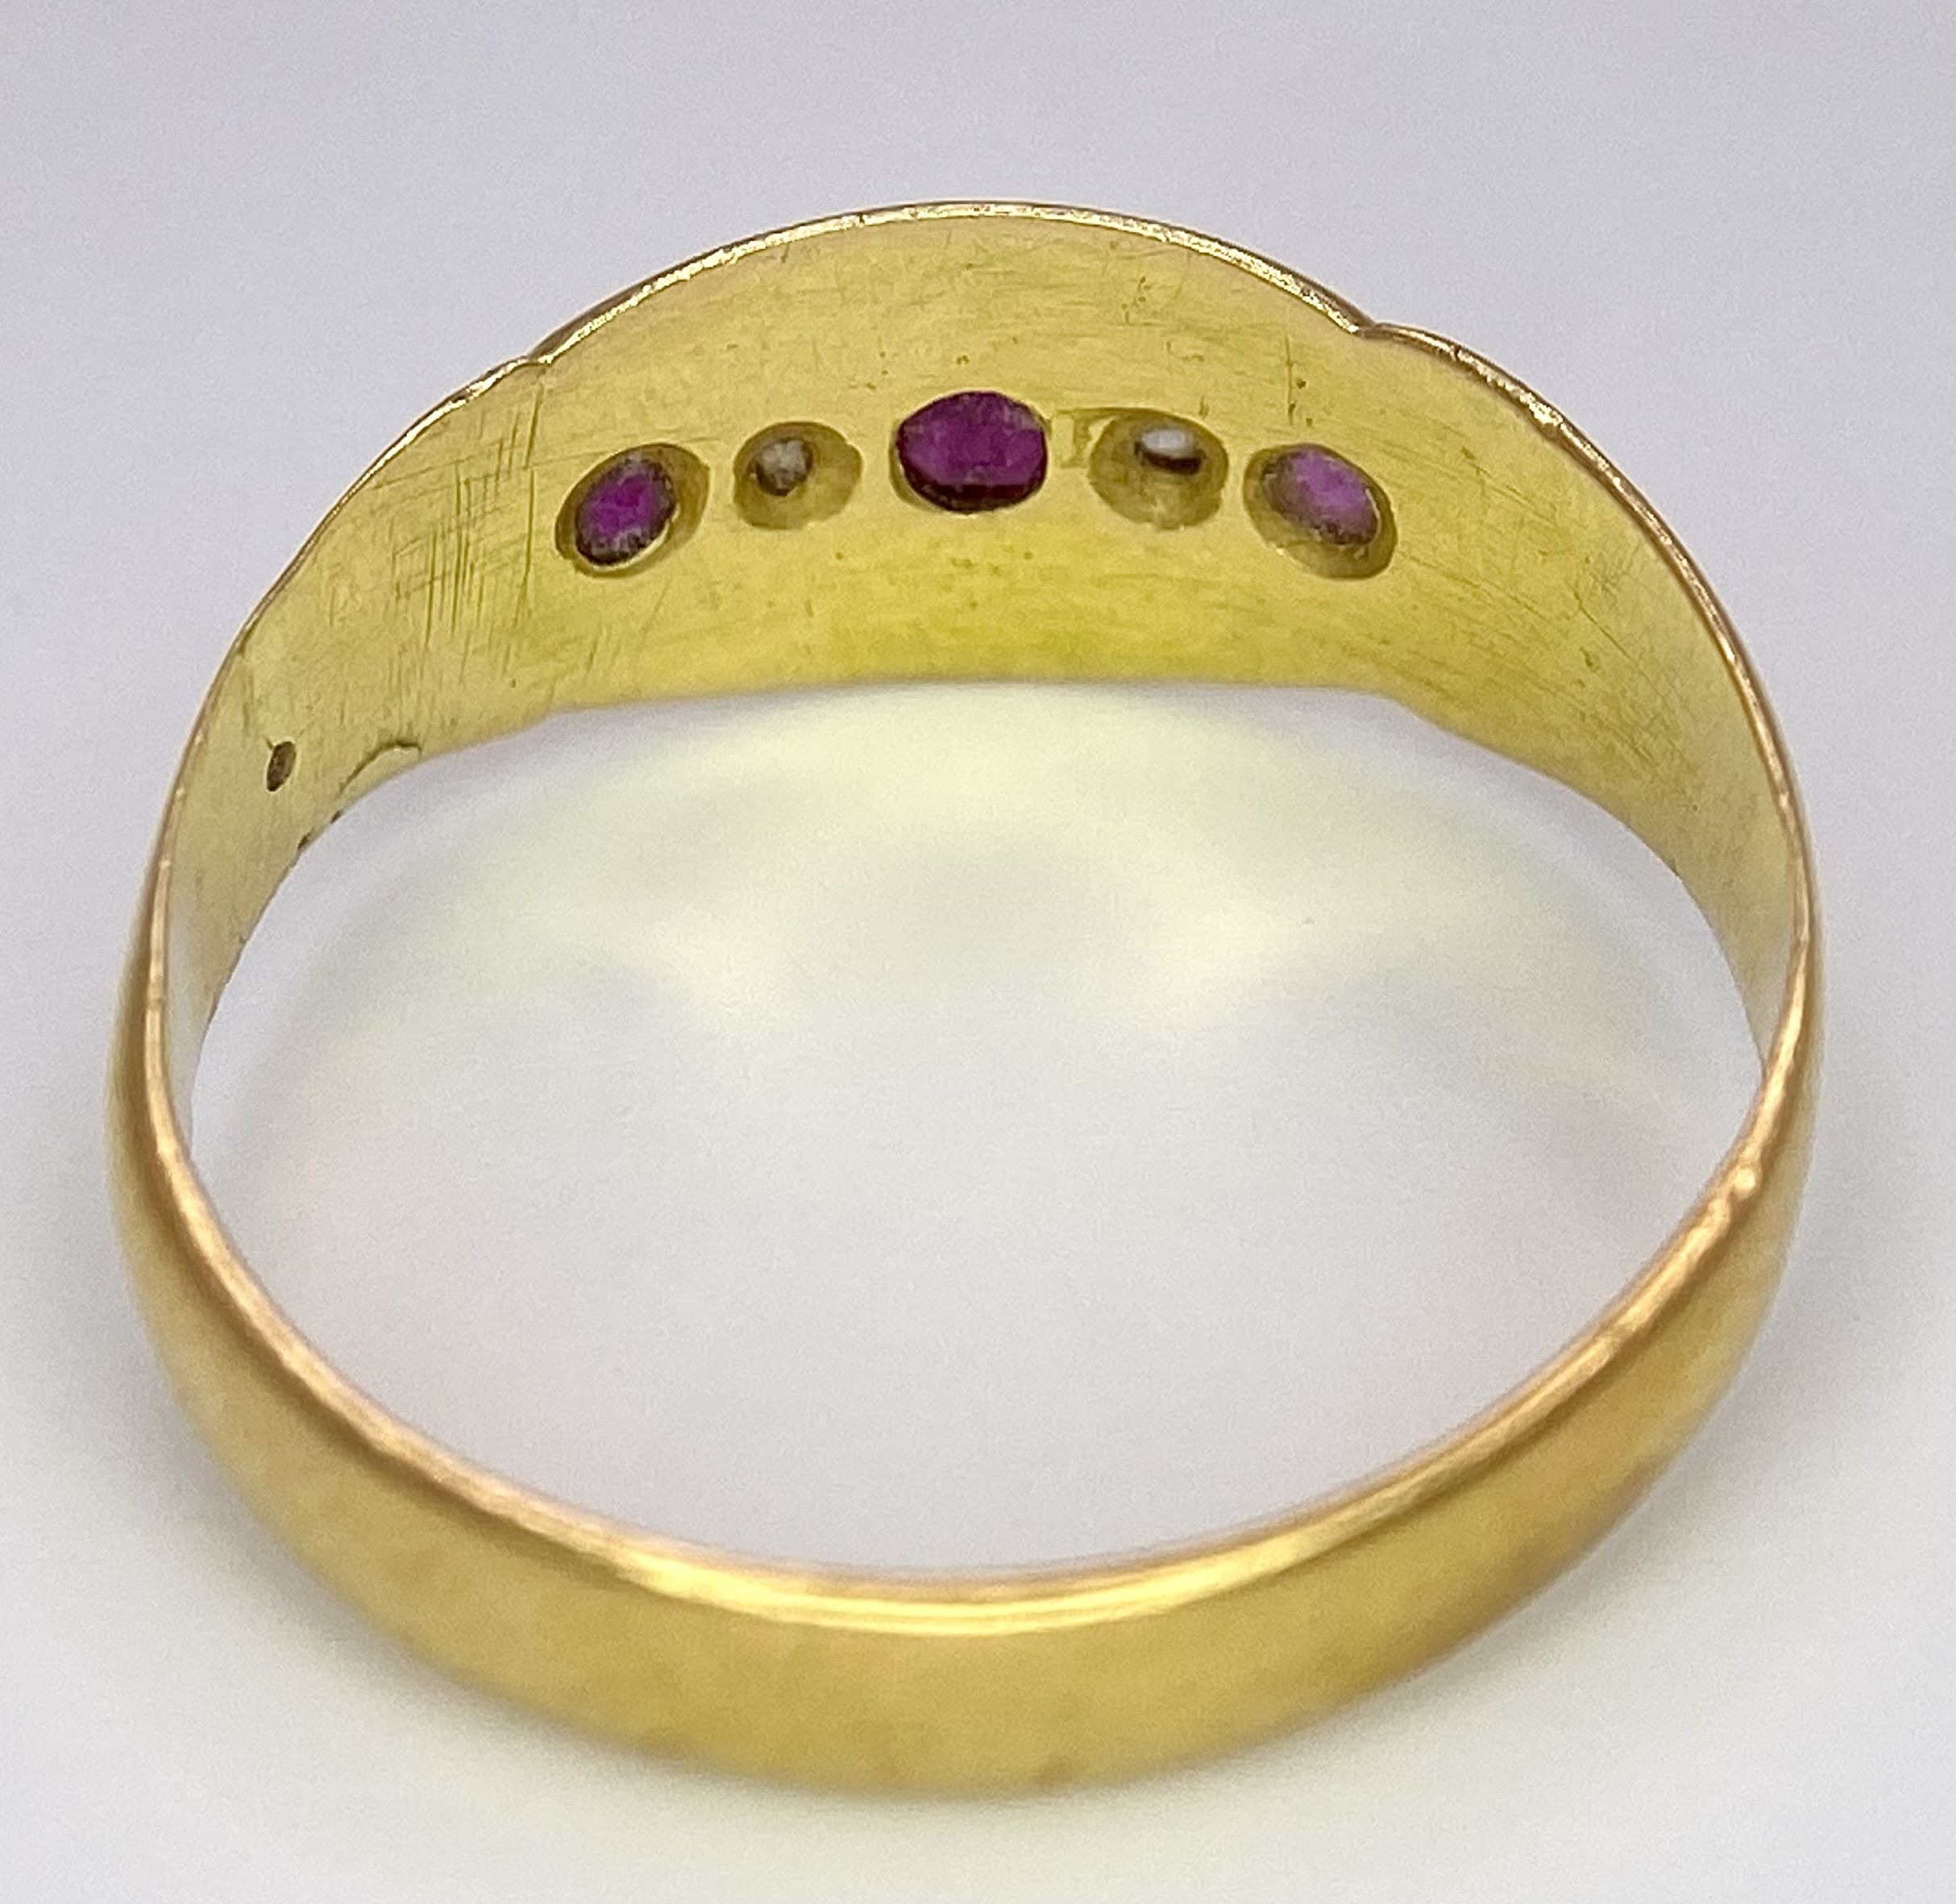 An Antique 22K Yellow Gold Ruby and Diamond Ring. Size M. 2.6g total weight. - Image 4 of 6